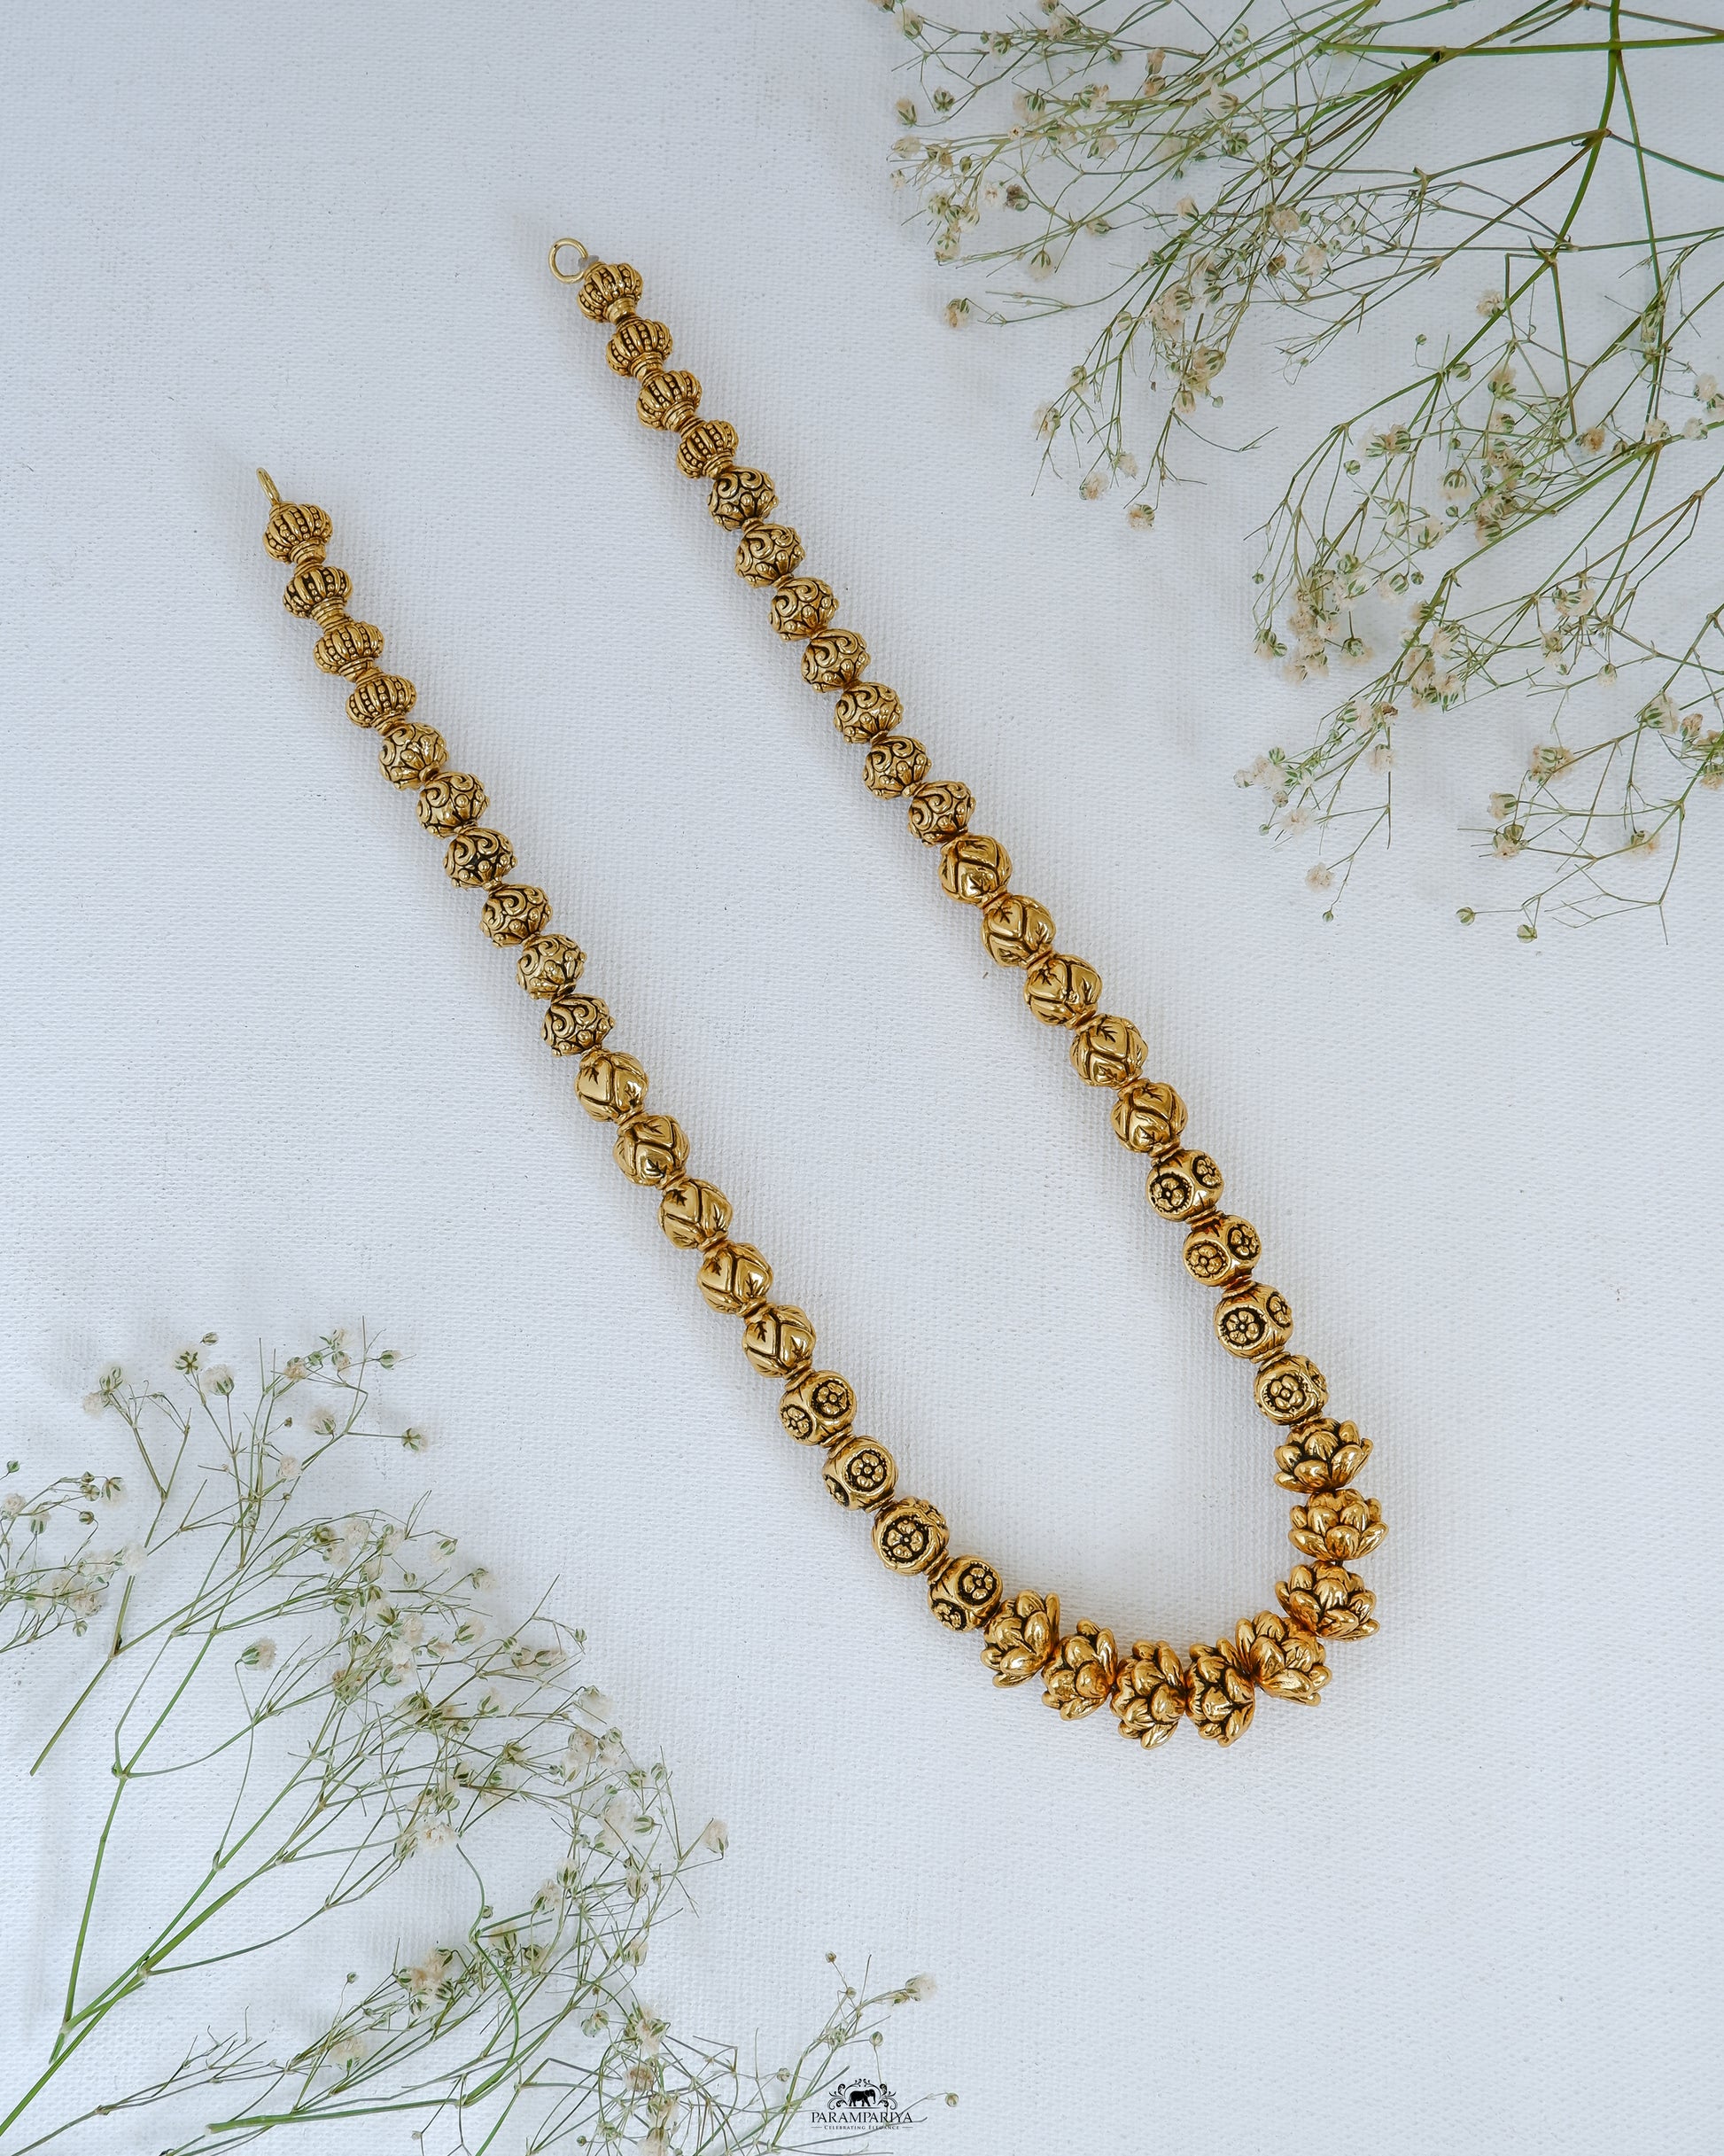 Simple micron gold plated 92.5 silver beads mala necklace to complete your minimal look.